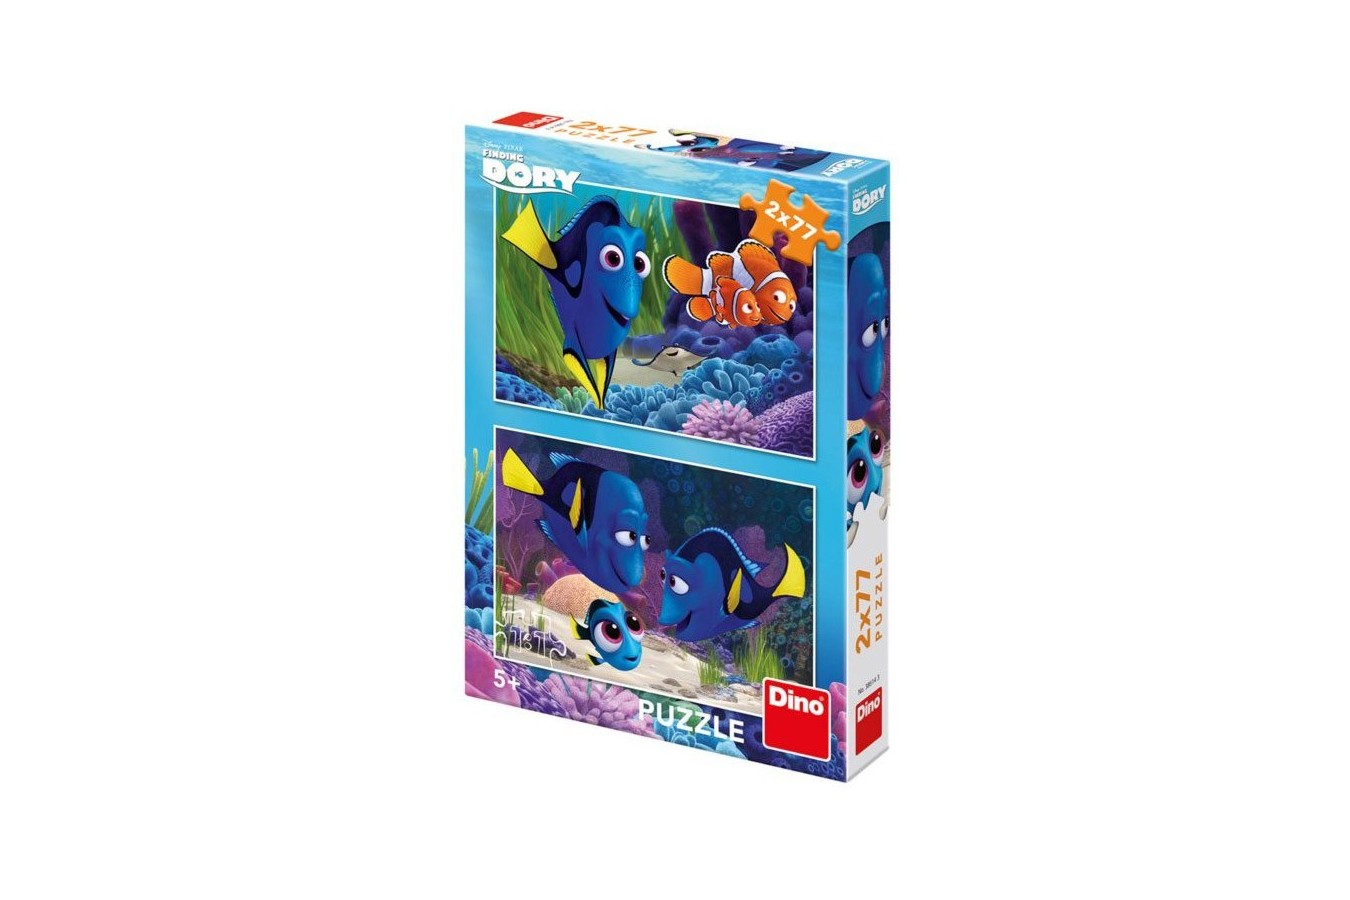 Puzzle Dino - Finding Dory, 2x77 piese (62904)